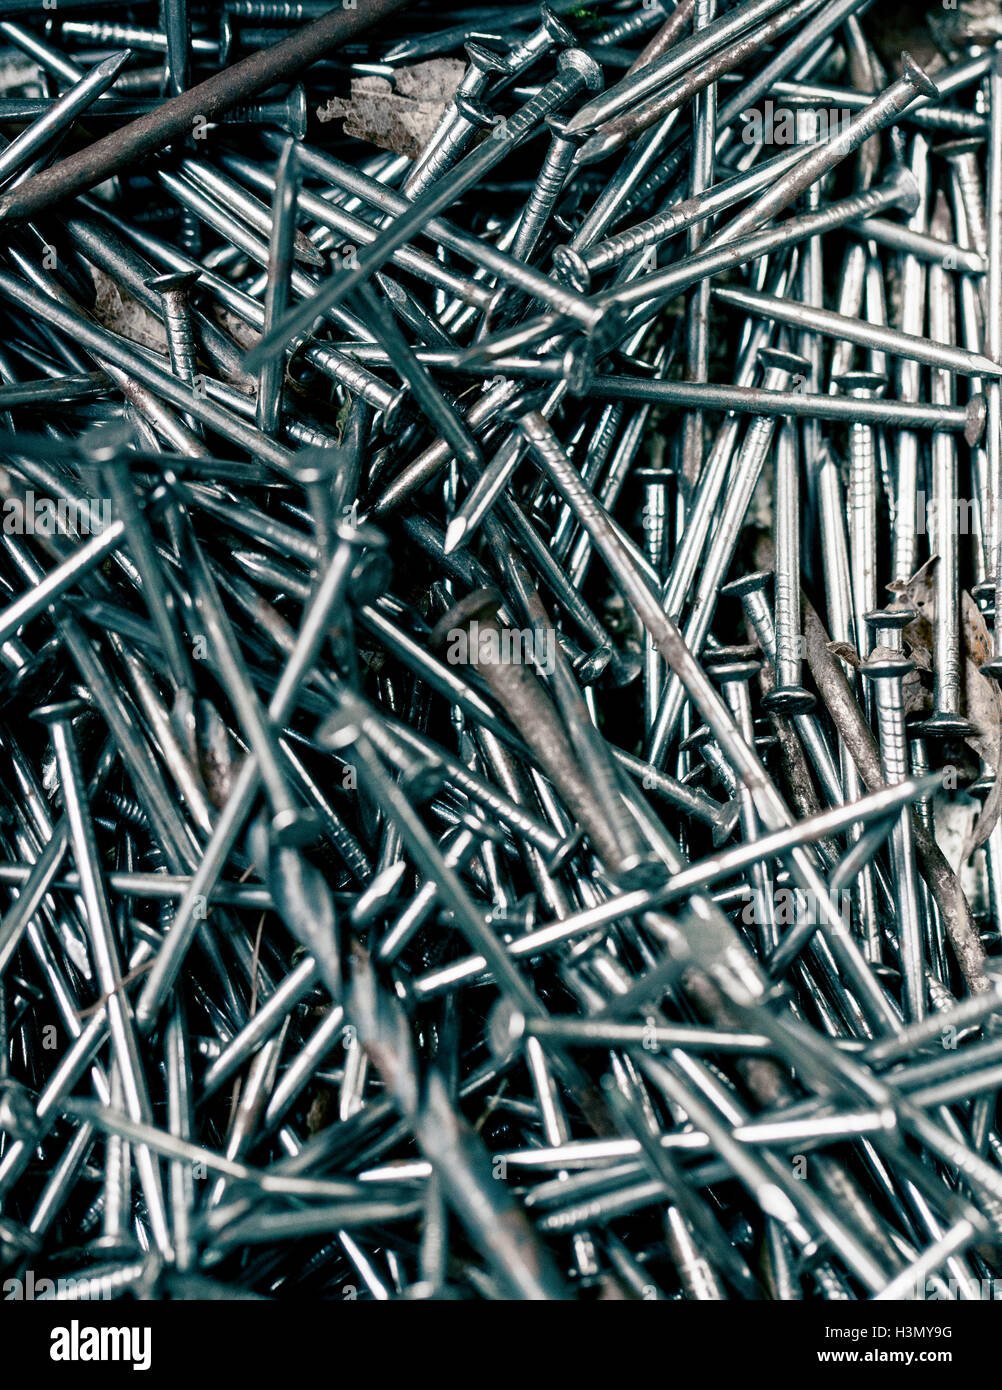 Variety of nails and screws Stock Photo